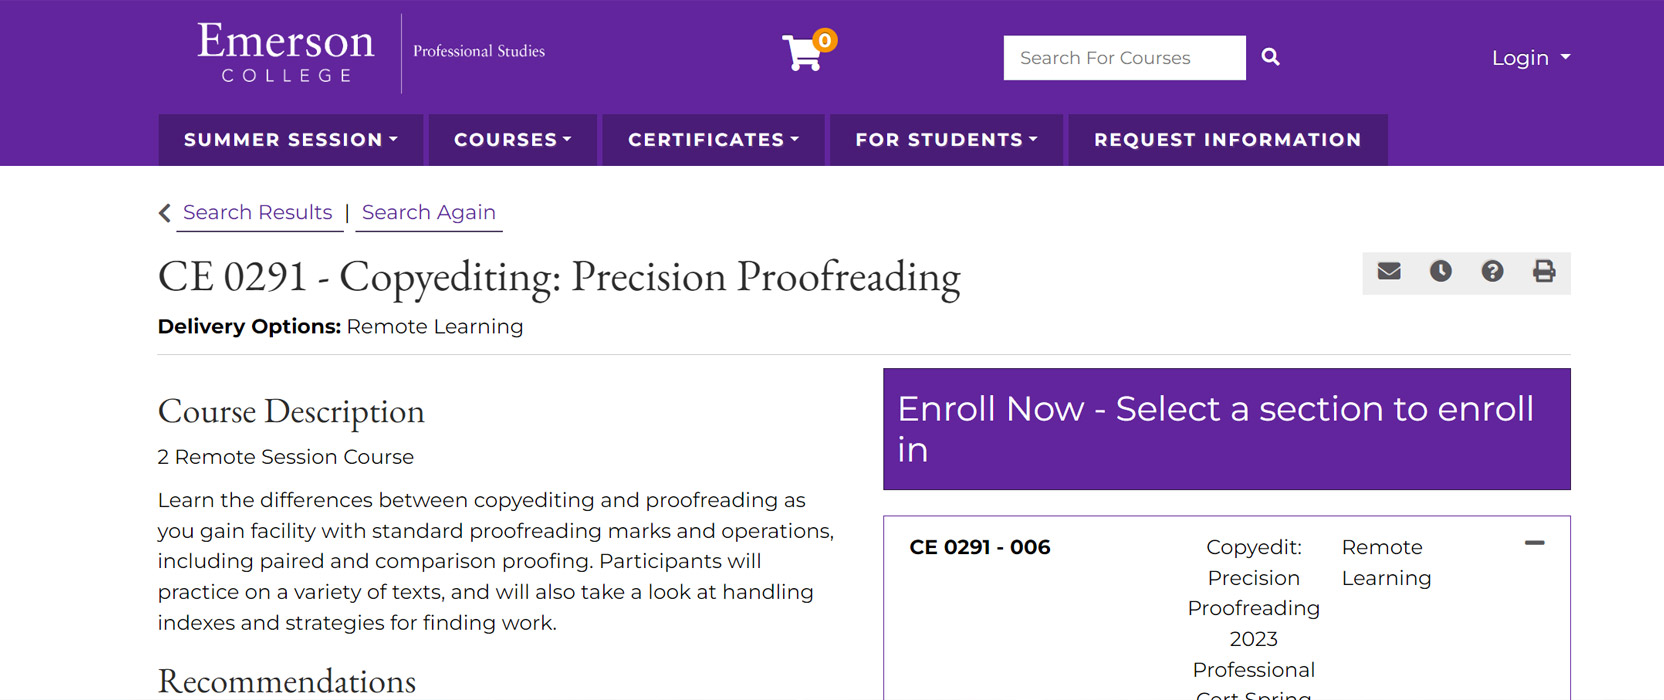 Screenshot of the Emerson College proofreading course homepage